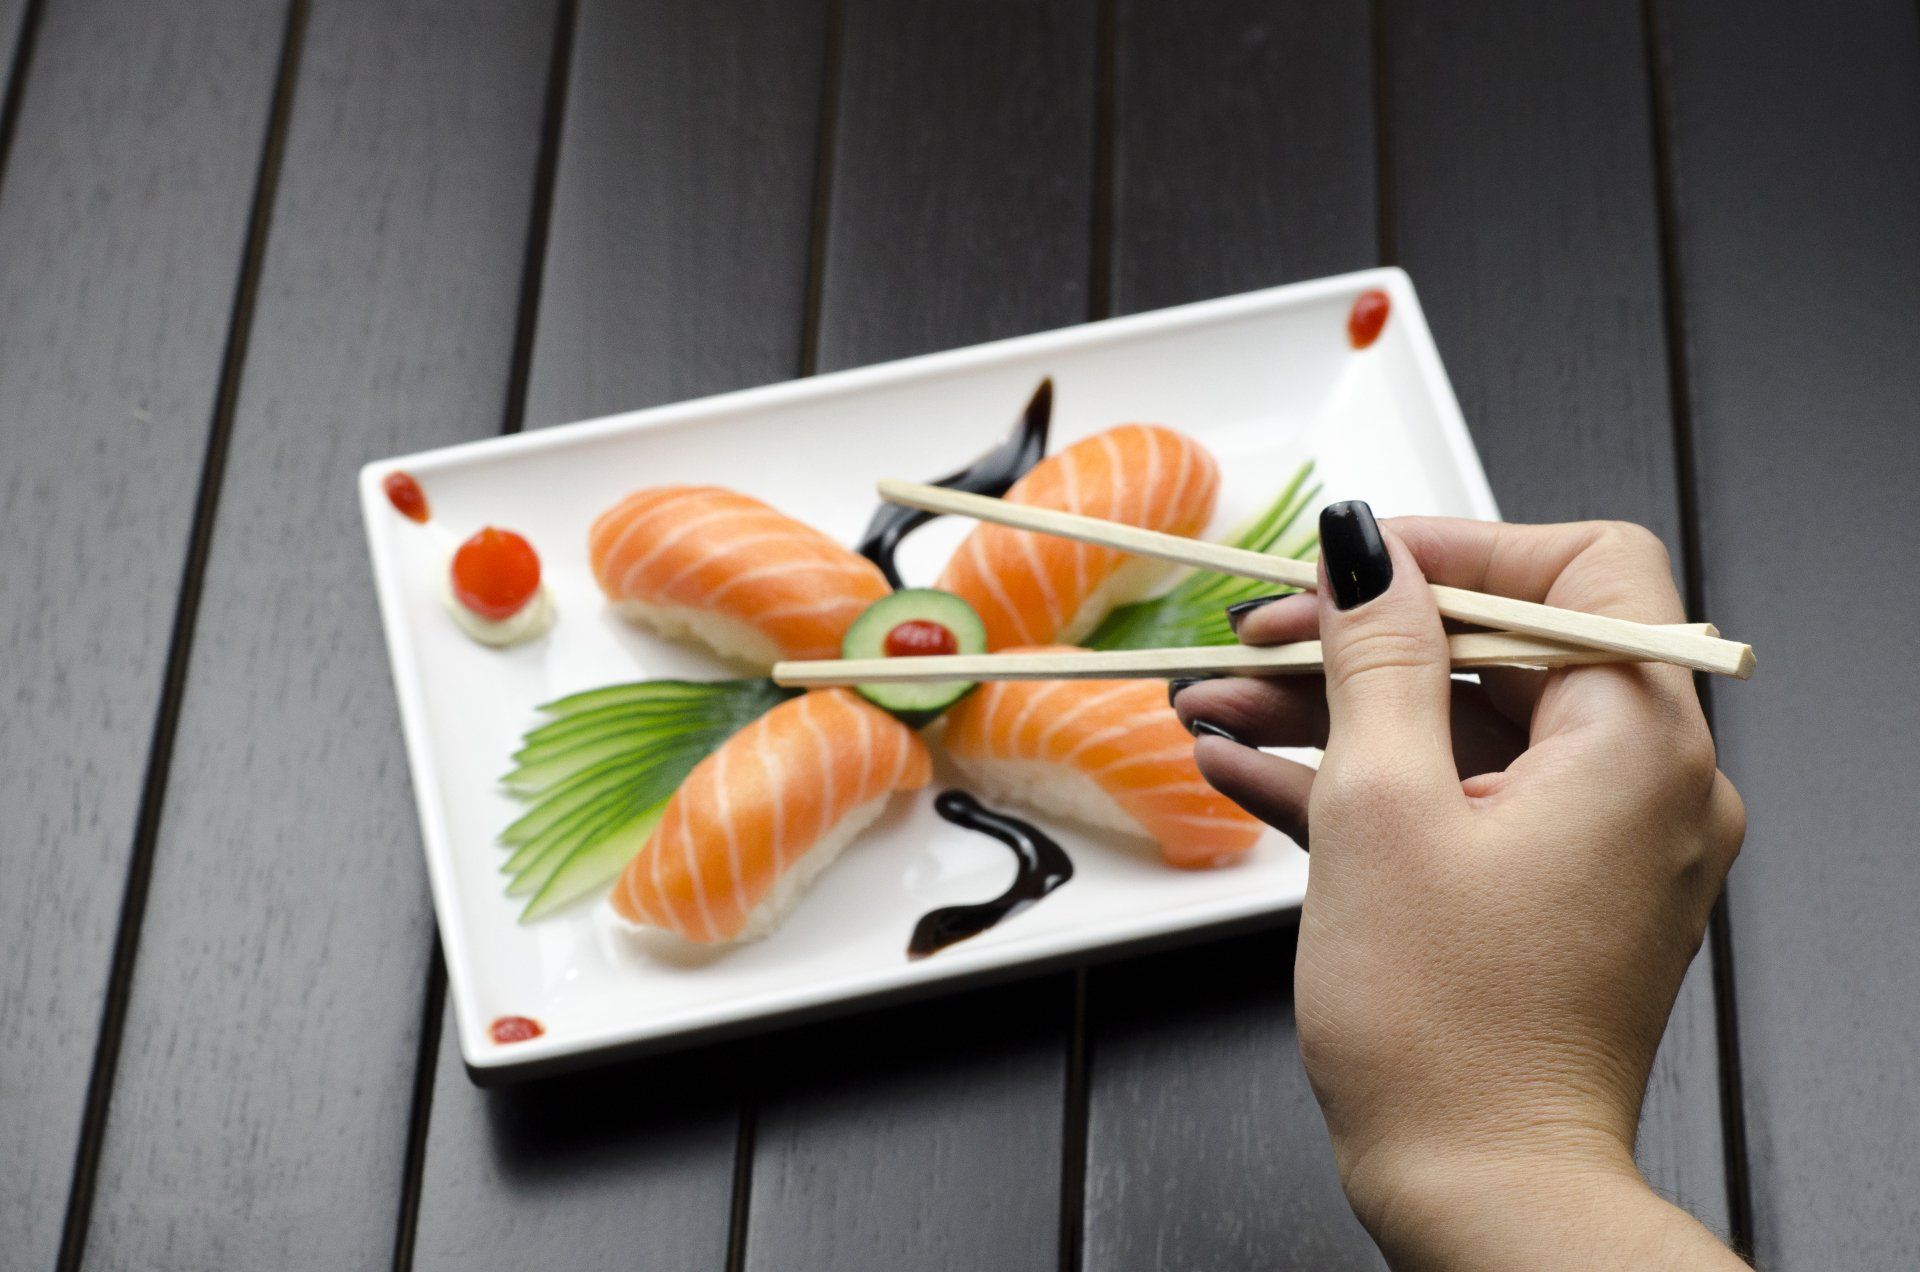 A person is holding chopsticks over a plate of sushi